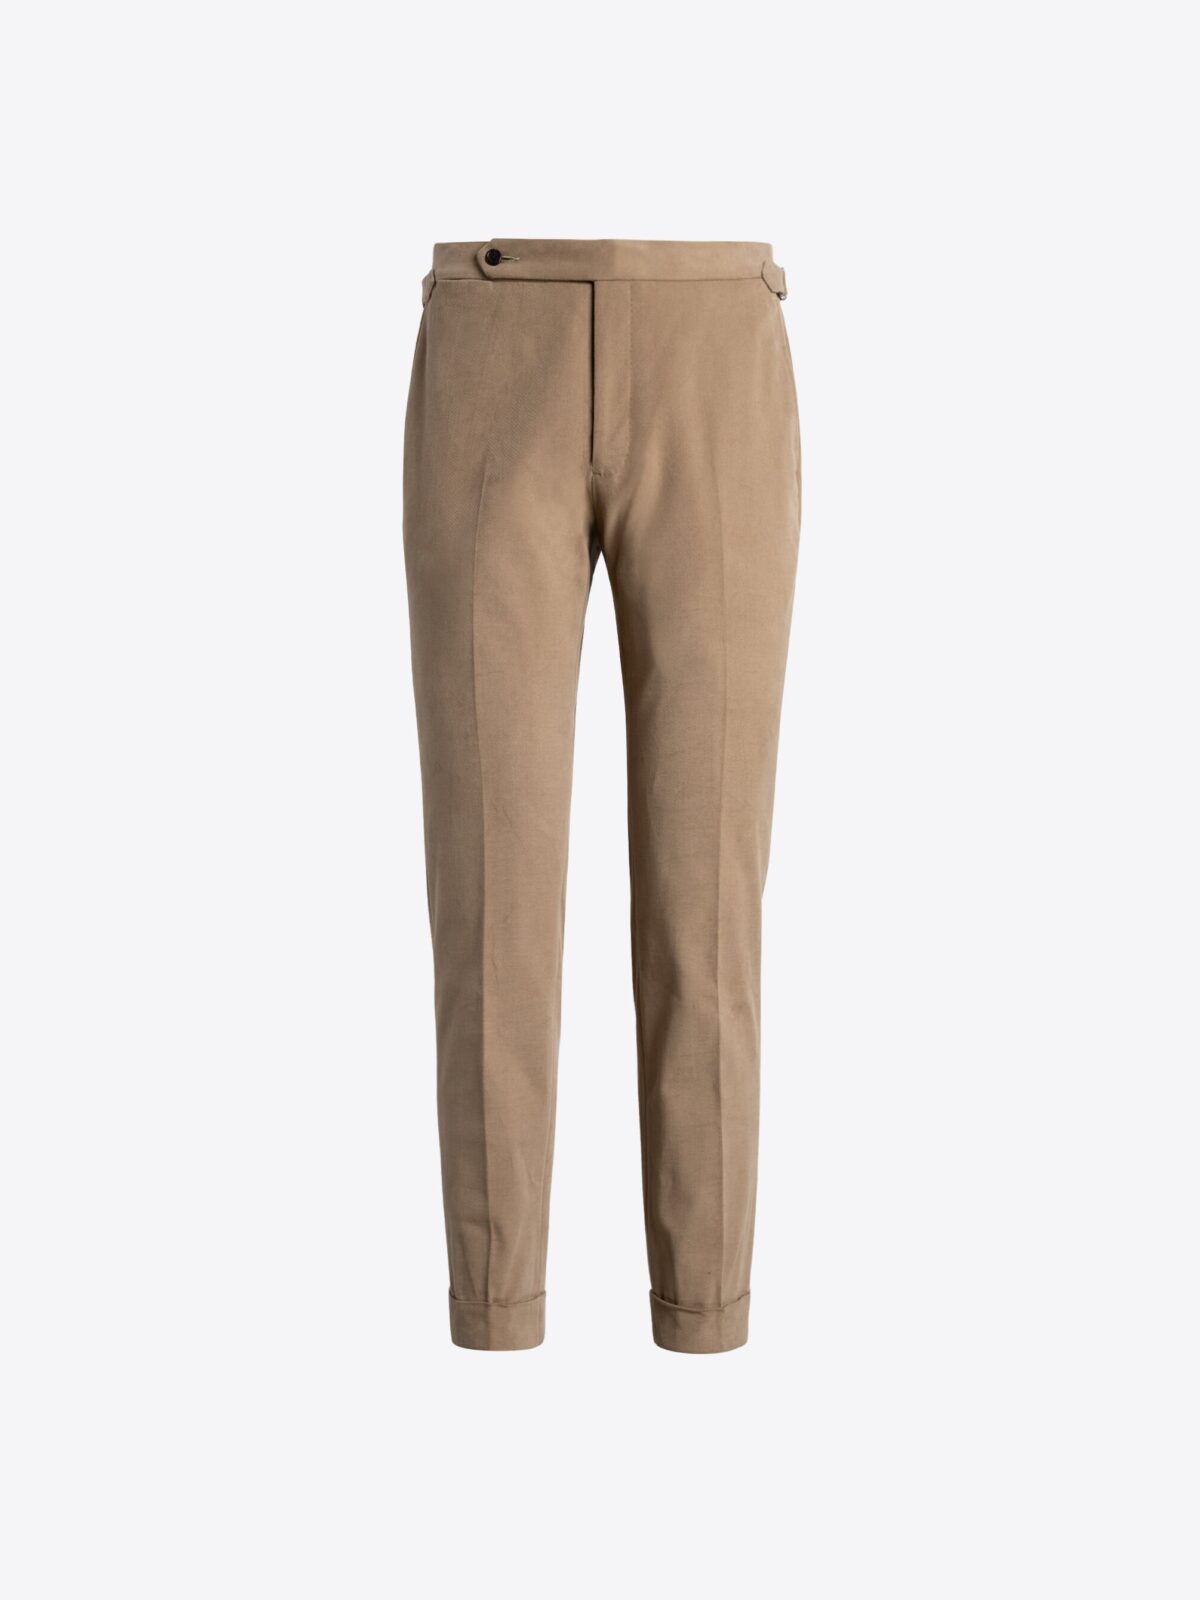 Hazel Heavy Brushed Cotton Stretch Dress Pant - Custom Fit Tailored Clothing